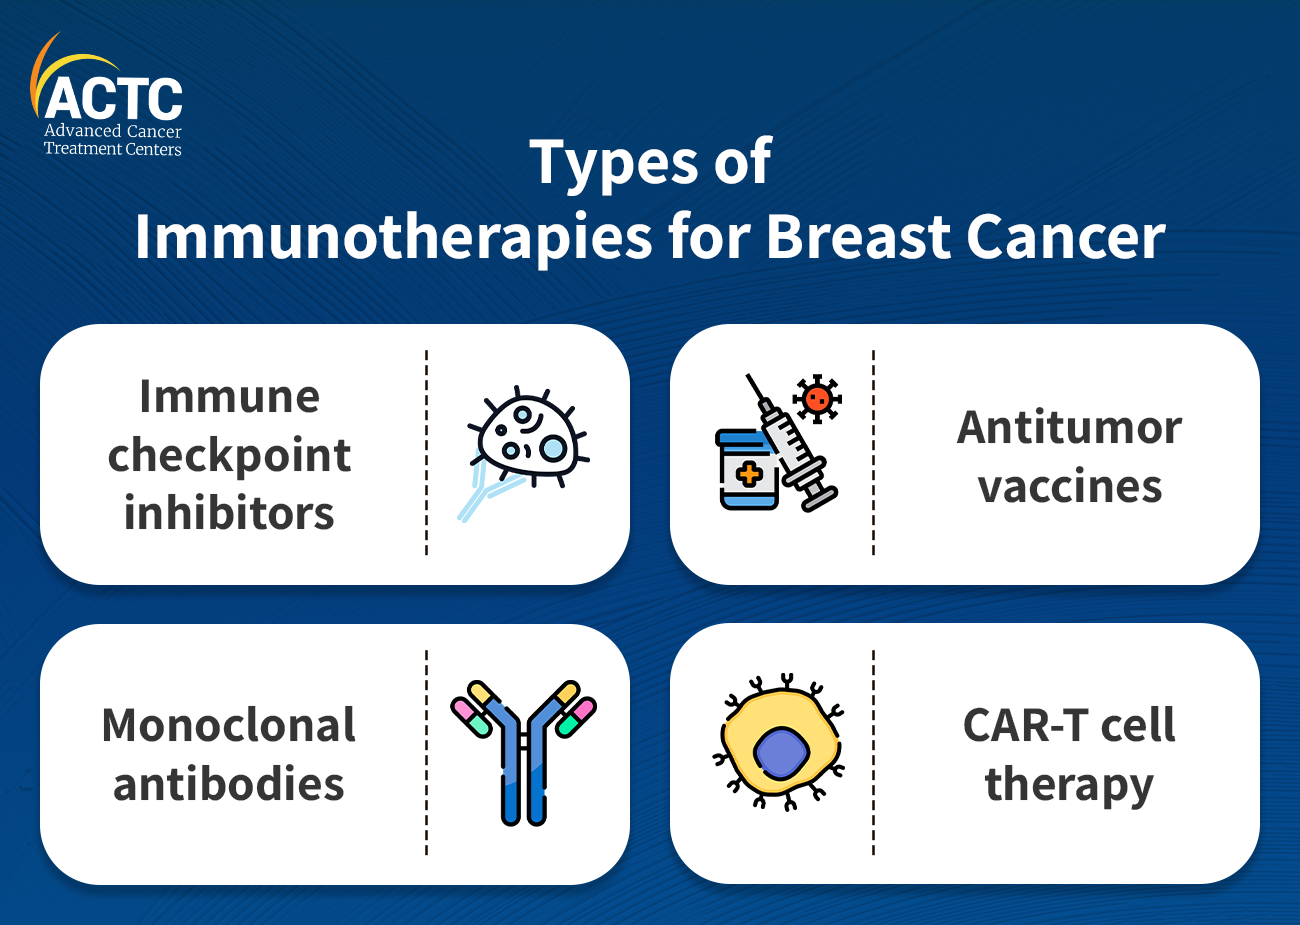 Types of Immunotherapies for Breast Cancer